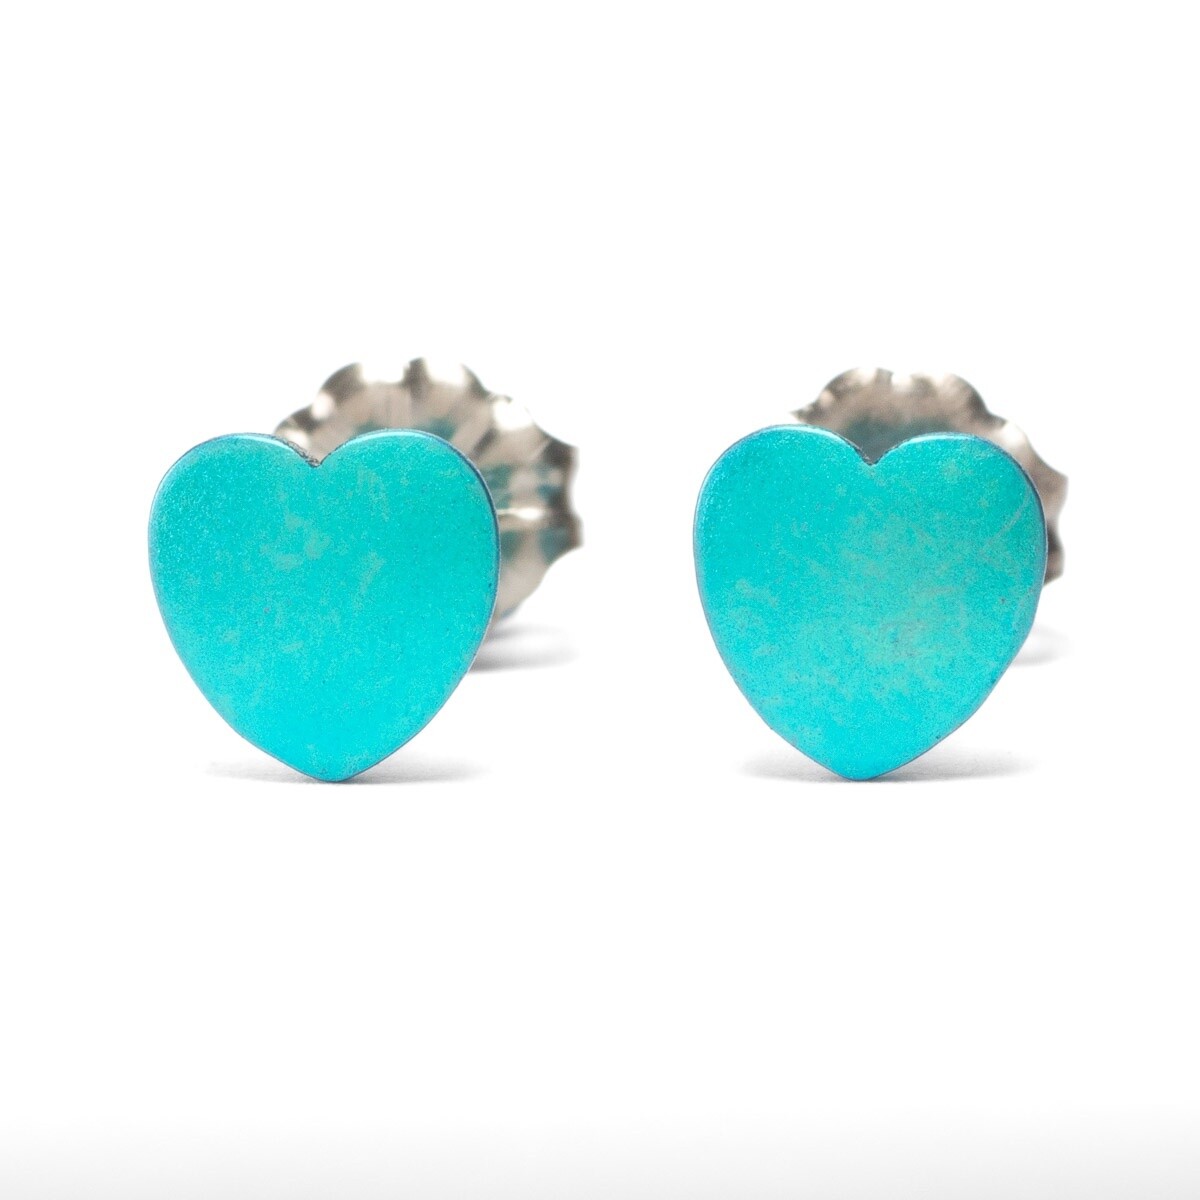 Titanium Heart Studs - Small - Kingfisher by Prism Design